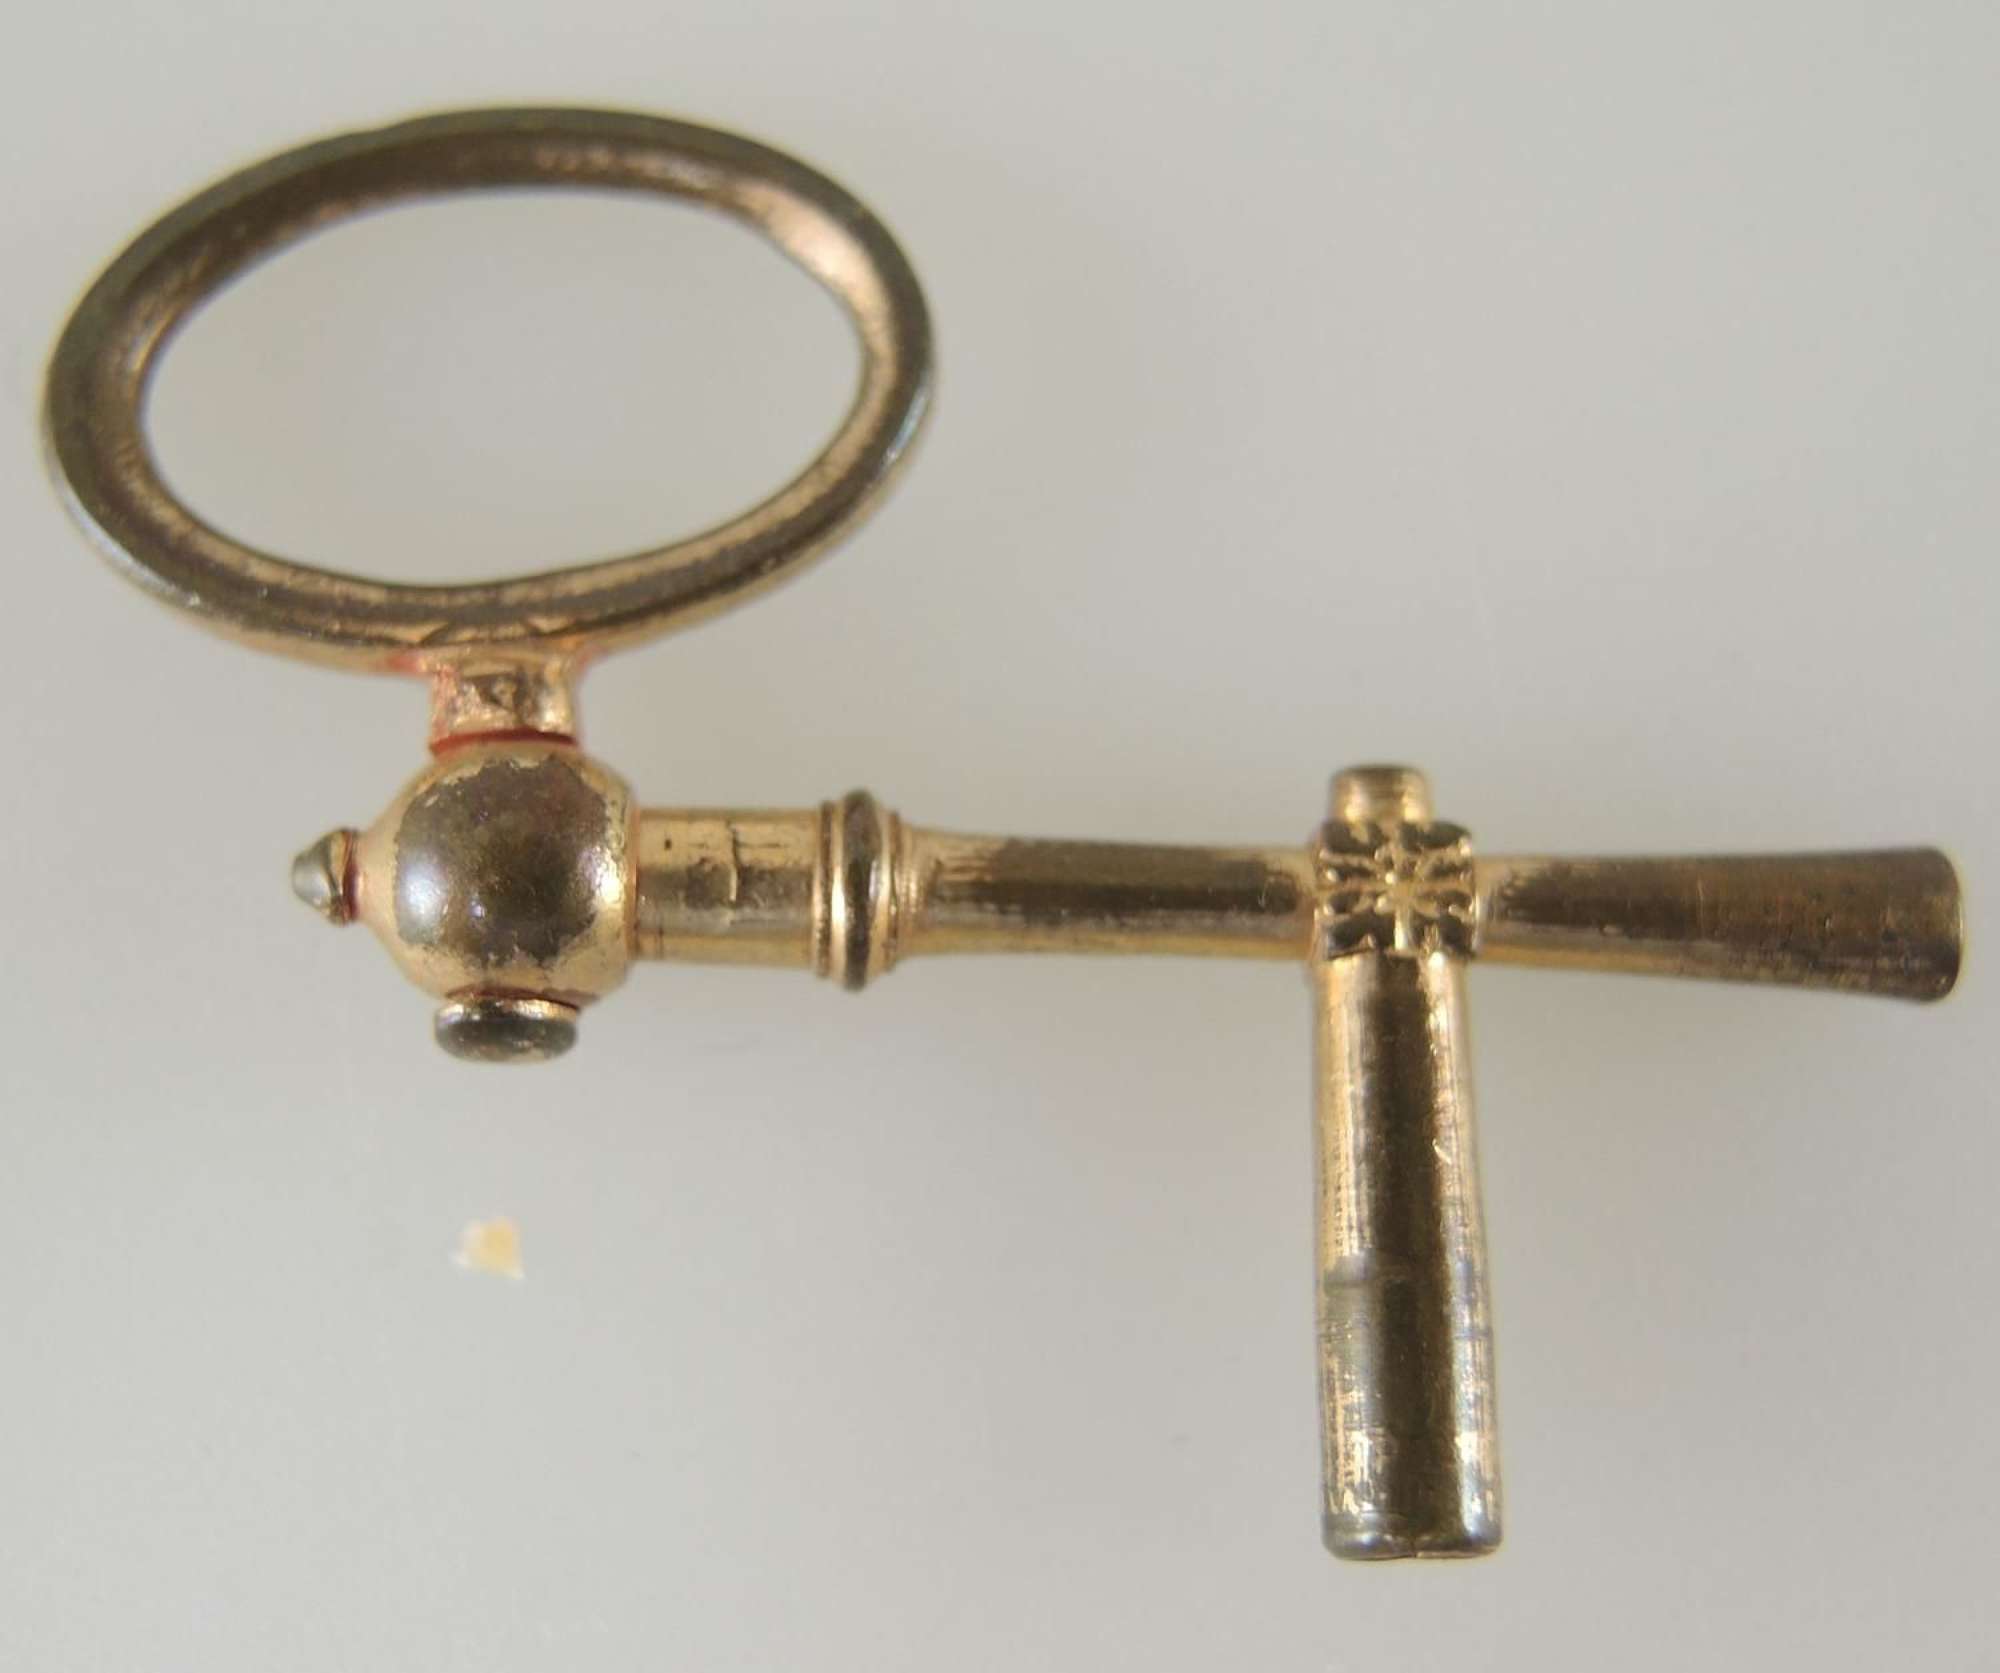 Early Gilt Double ended Crank Pocket Watch Key. Circa 1770